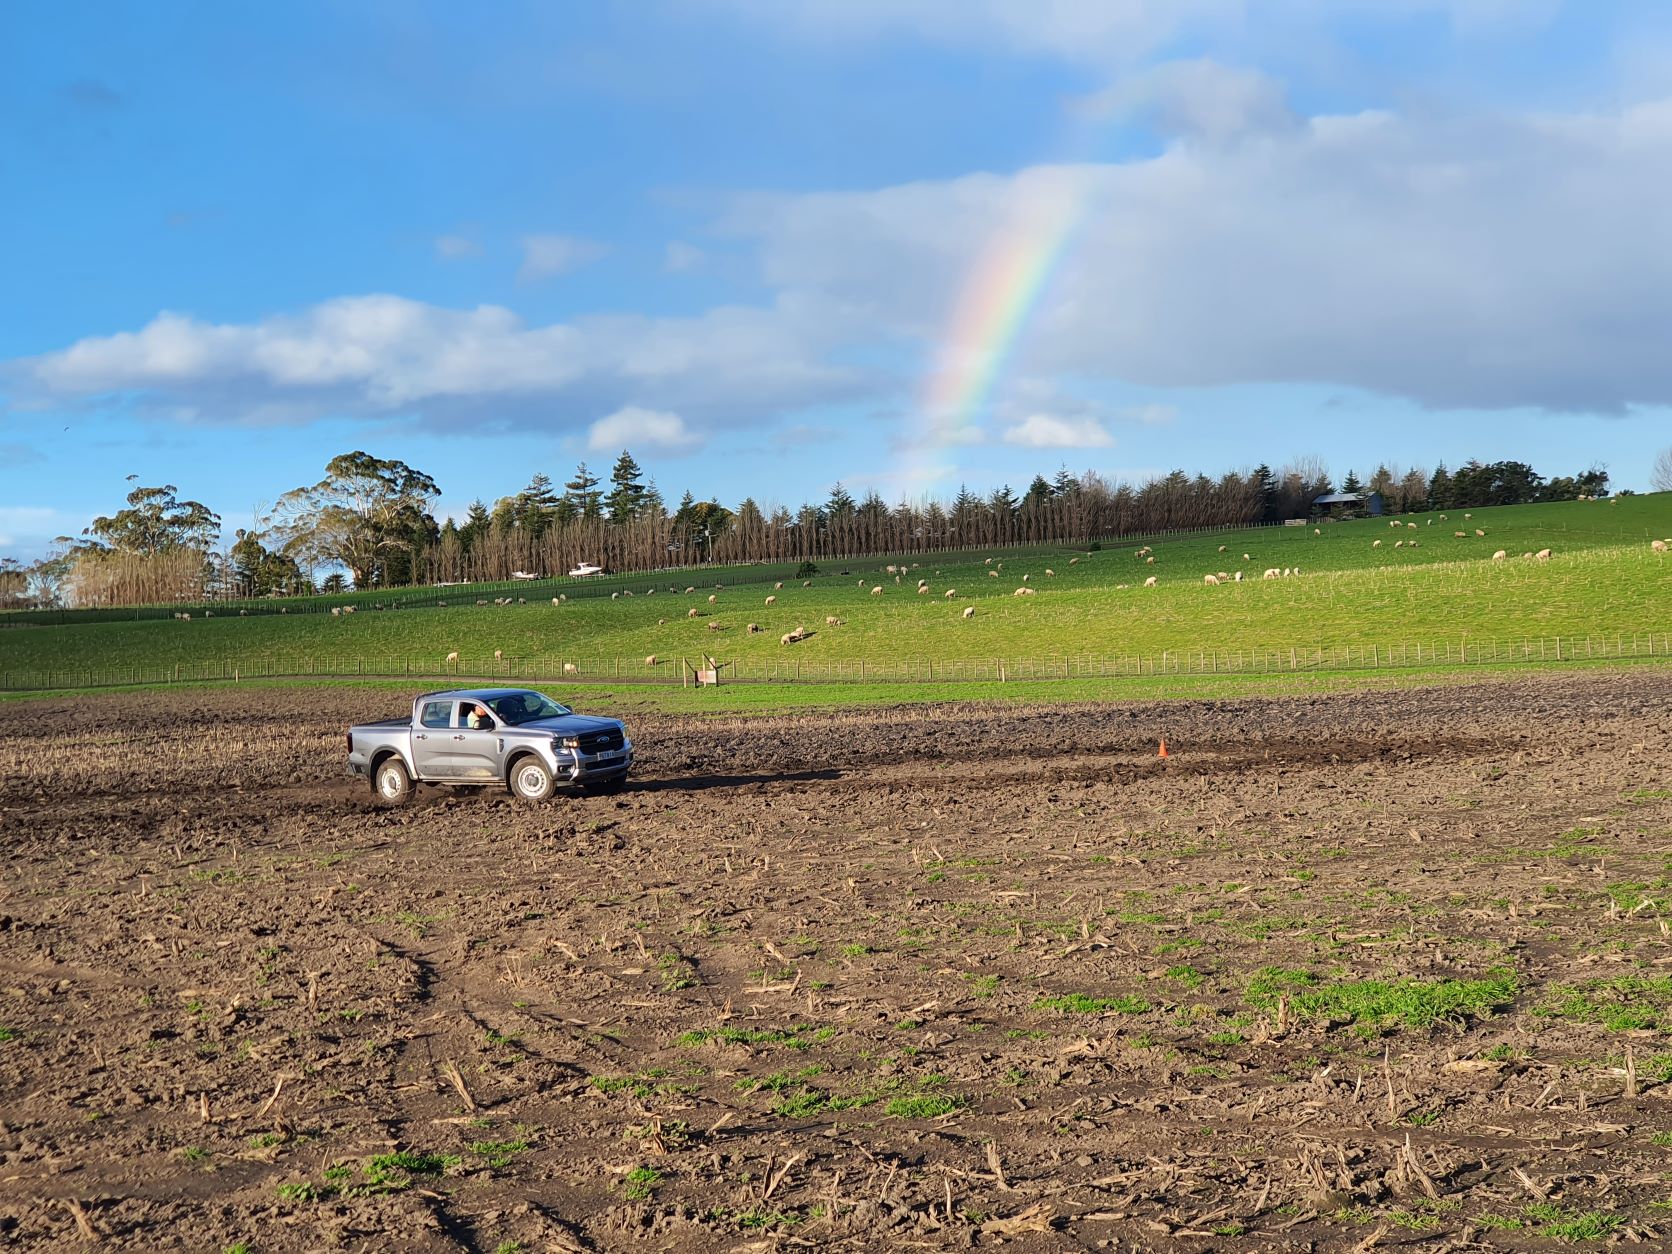 A 2022 Ford Ranger 4x4 going sideways in a muddy field under rainbow. Photo taken at Outfoxed, Havelock North, New Zealand